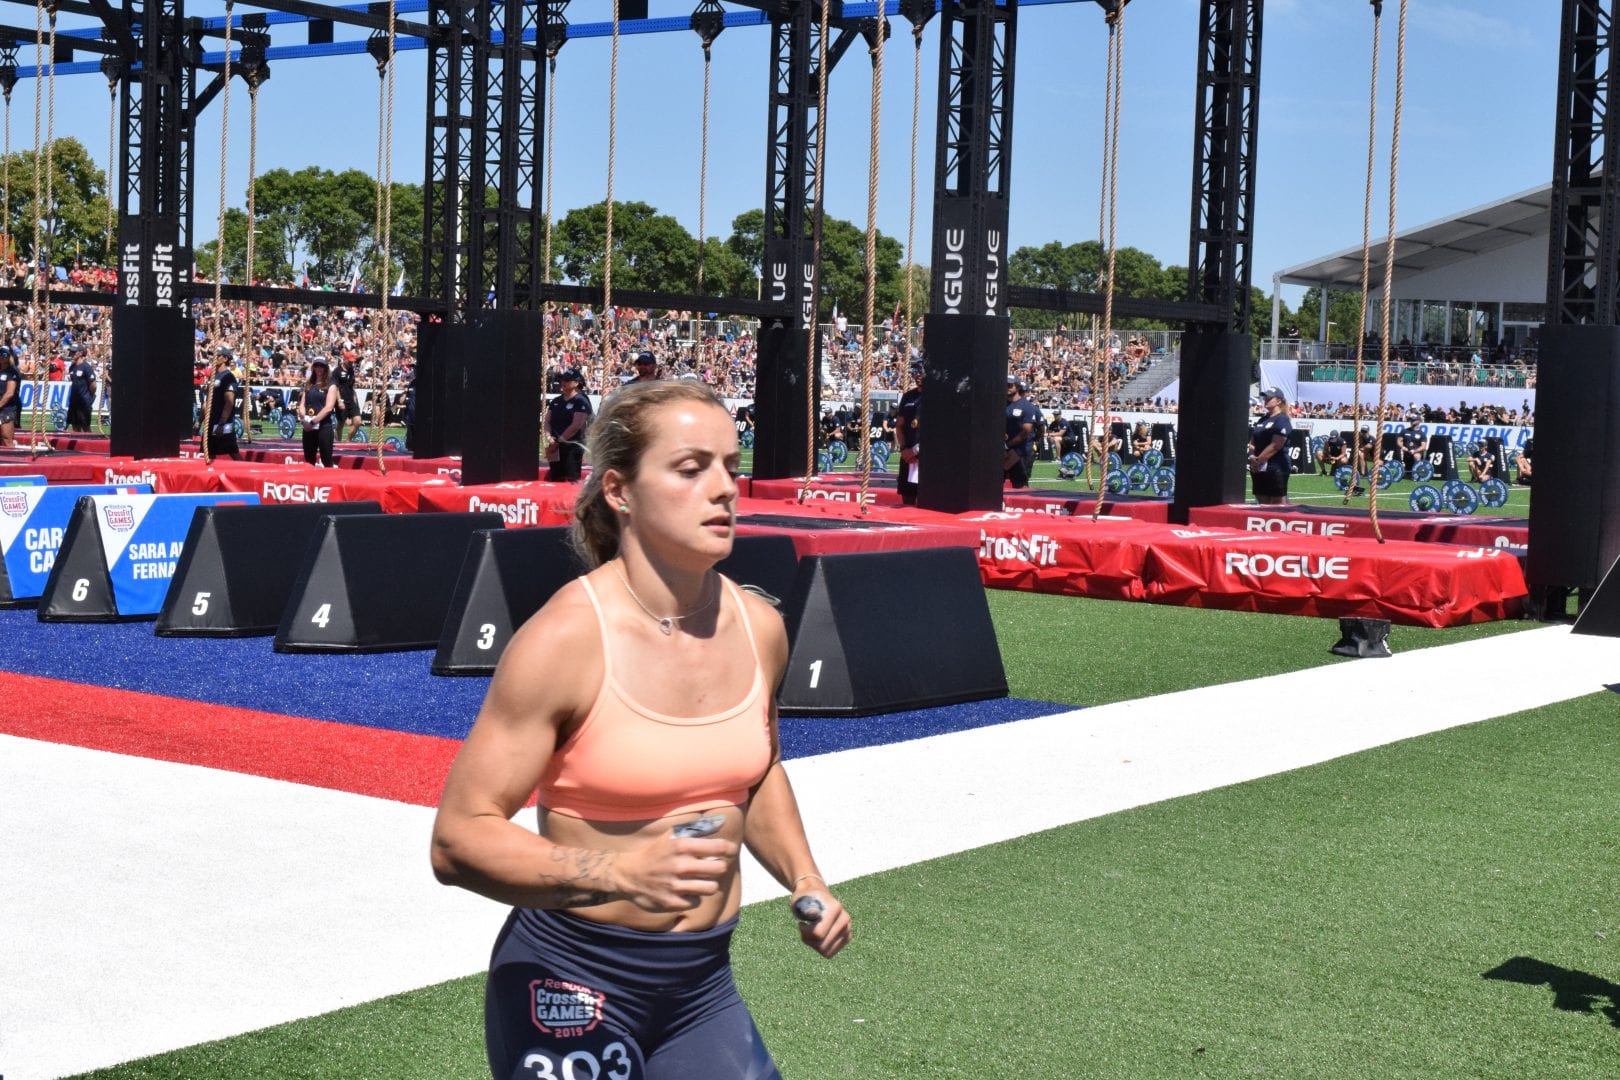 Madeline Sturt takes a lap between rounds of legless rope climbs at the 2019 CrossFit Games